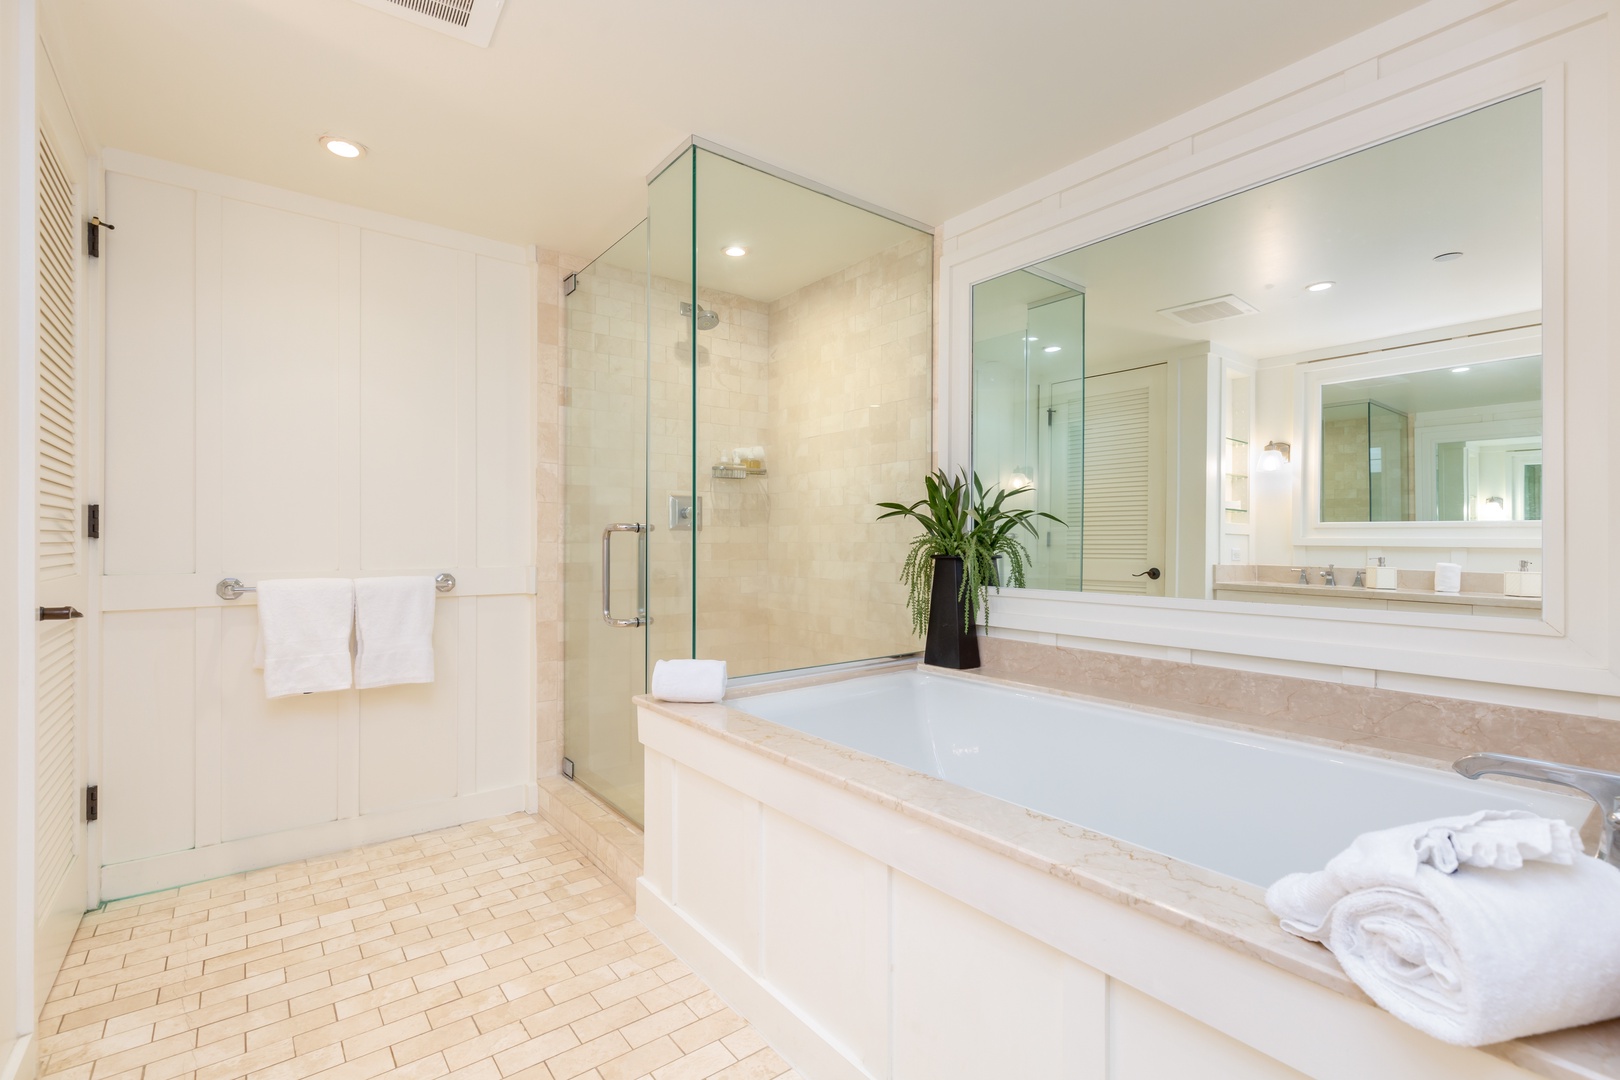 Kahuku Vacation Rentals, Turtle Bay Villas 101 - Primary Bathroom with walk in shower and tub